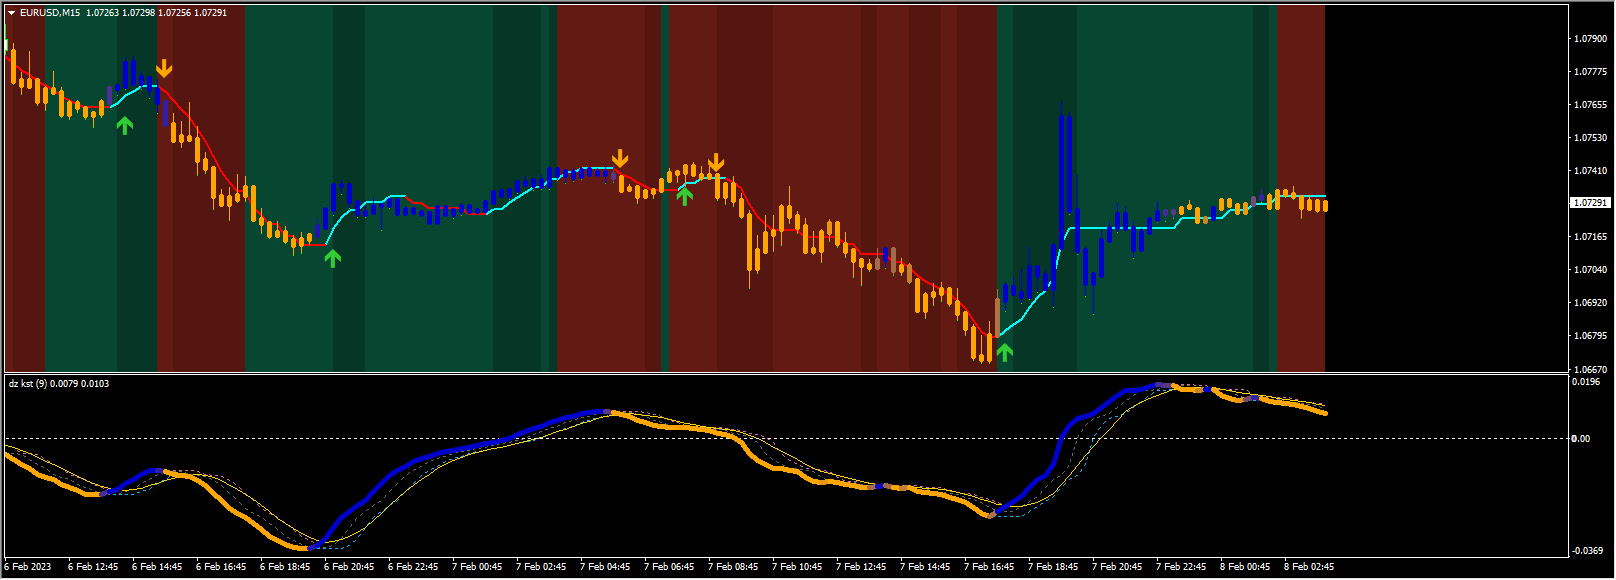 mladen’s_and_mrtool’s_trend_following_indicators_system